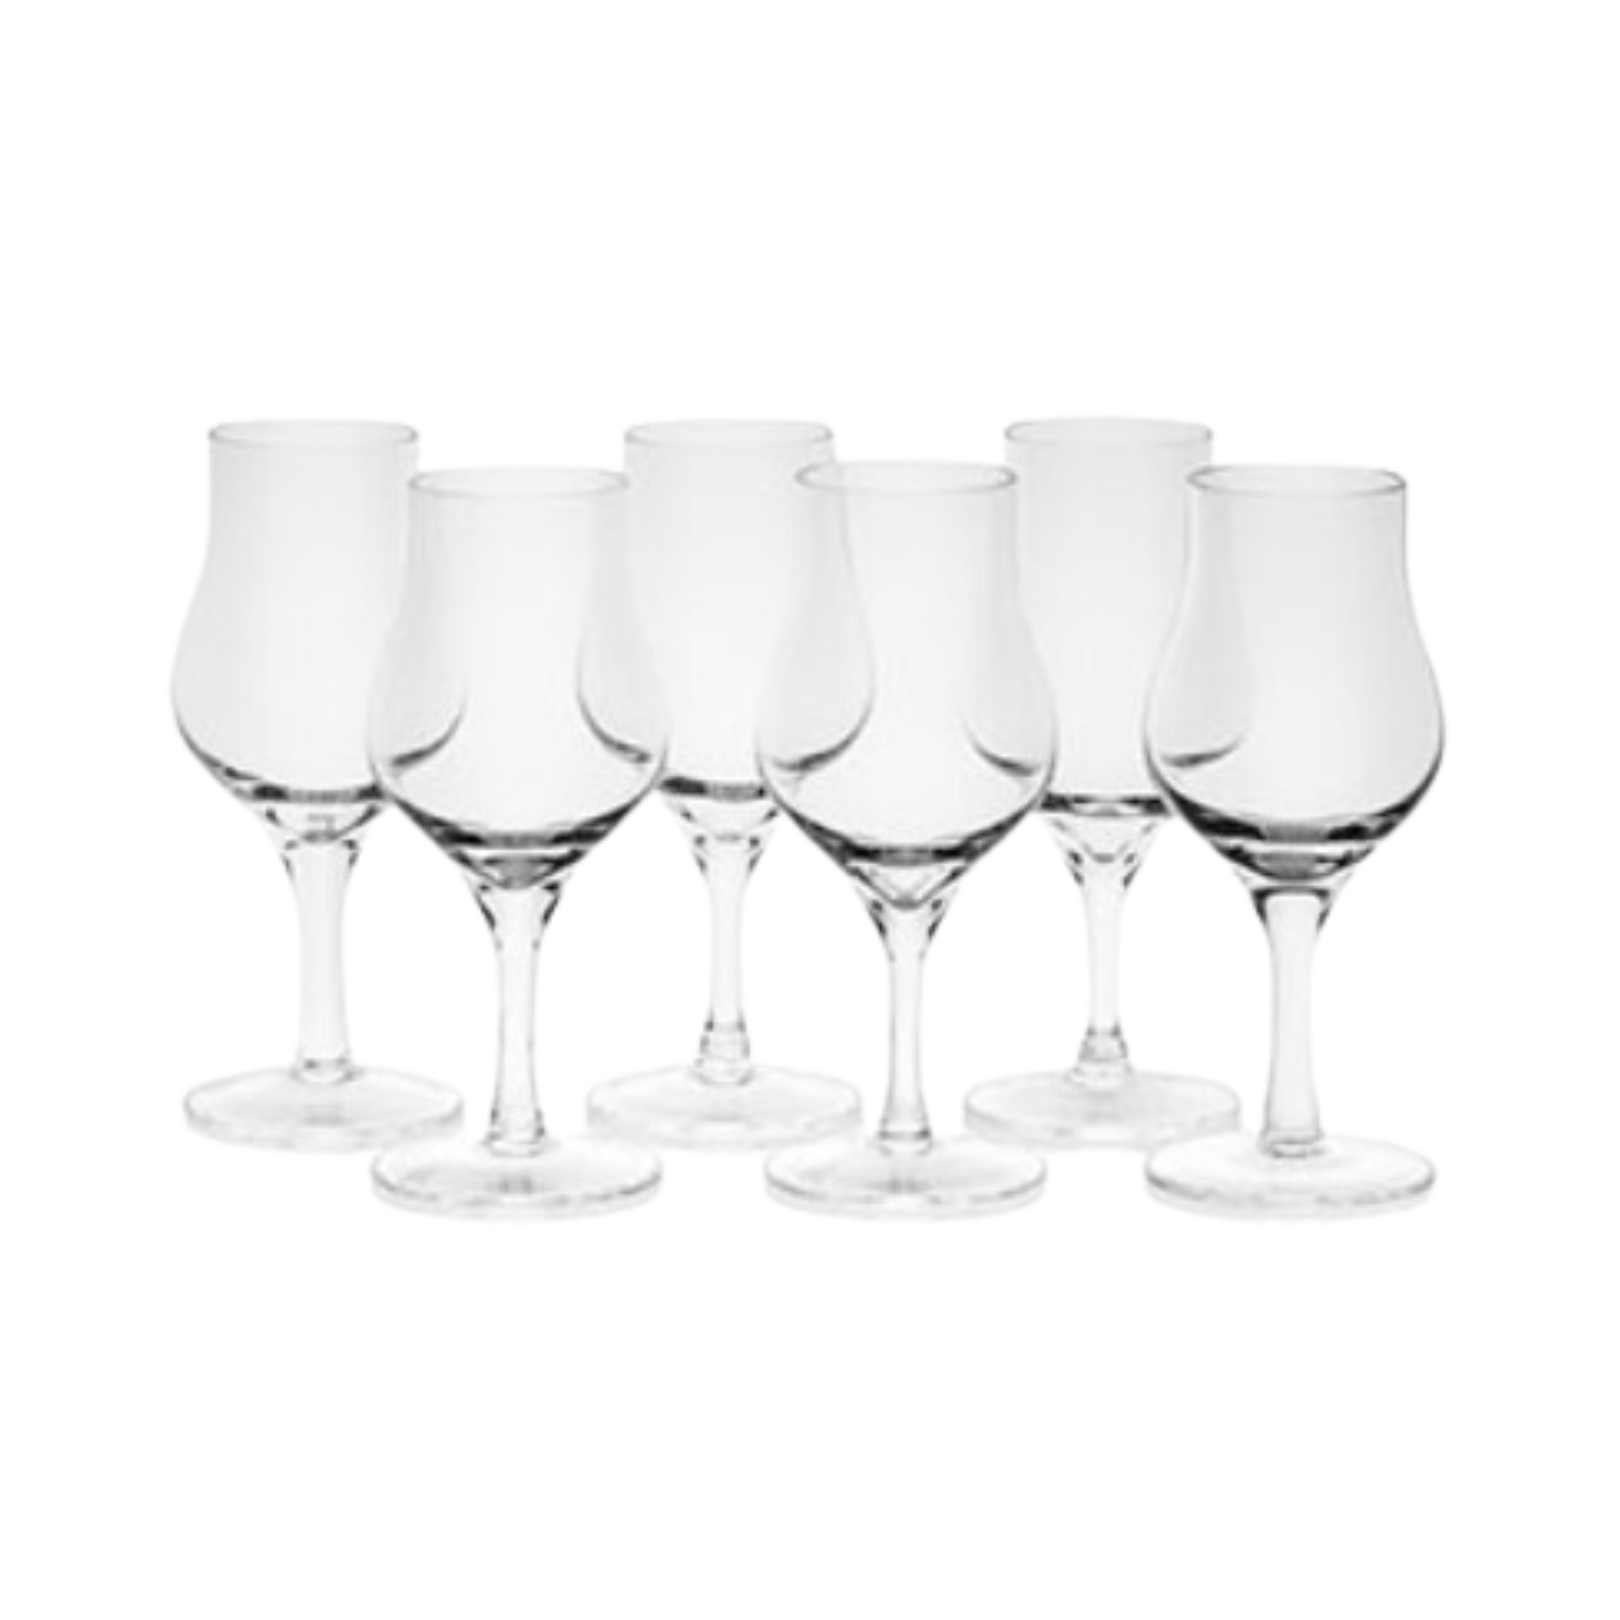 Amber Handmade Whisky Nosing & Tasting Glasses G200 - Pack of 6 (Without Lid or Gift Box)